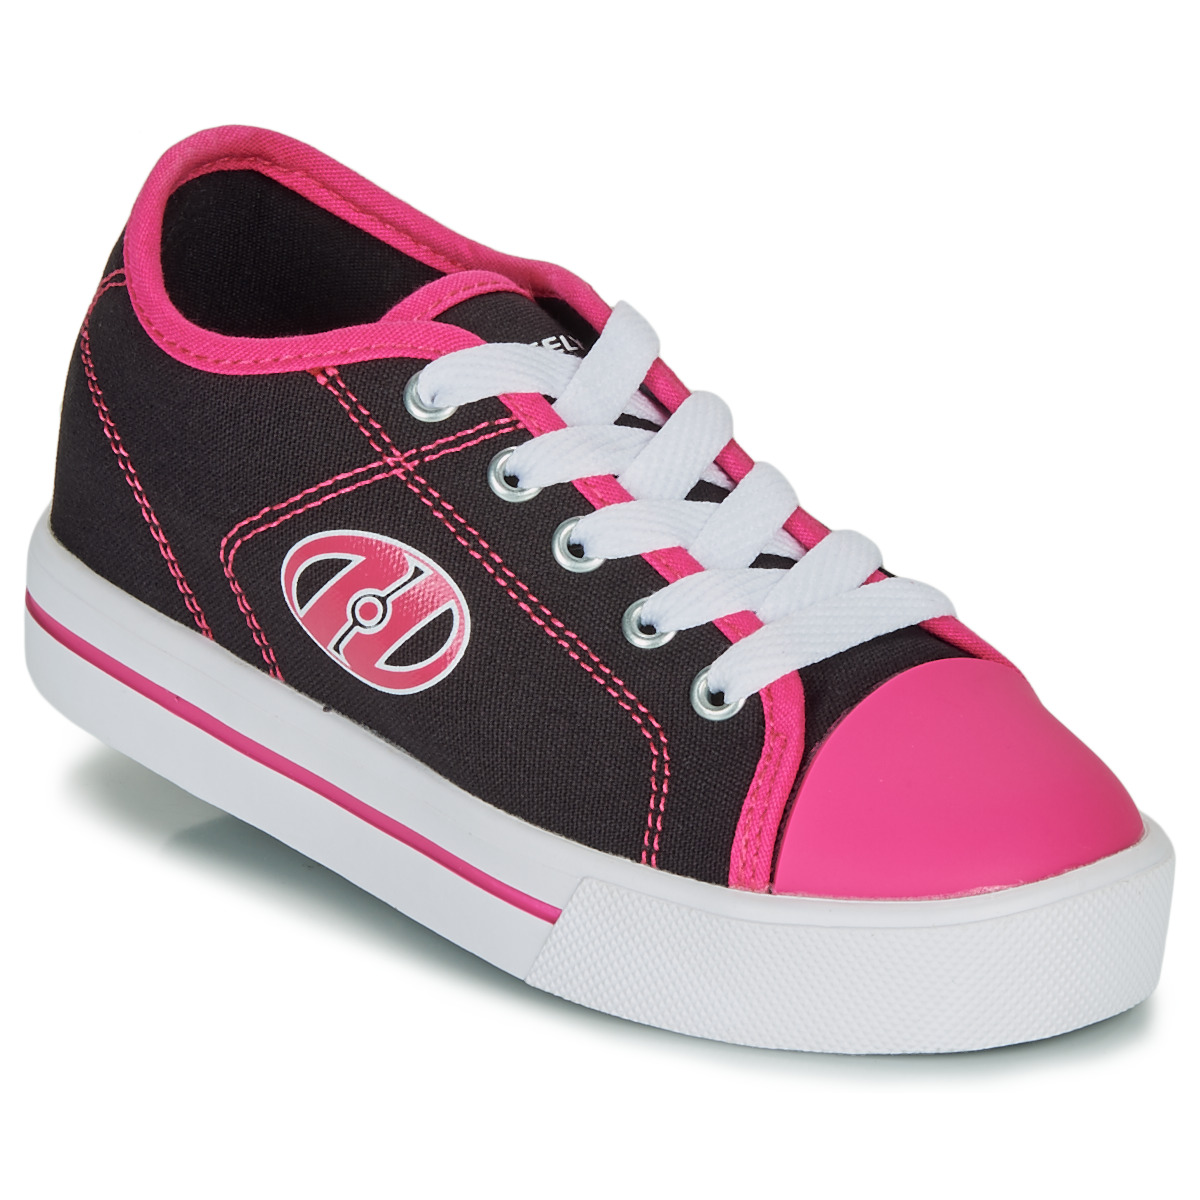 Heelys CLASSIC X2 Black / Pink - Free delivery | Spartoo NET ! - Shoes shoes Child USD/$72.00